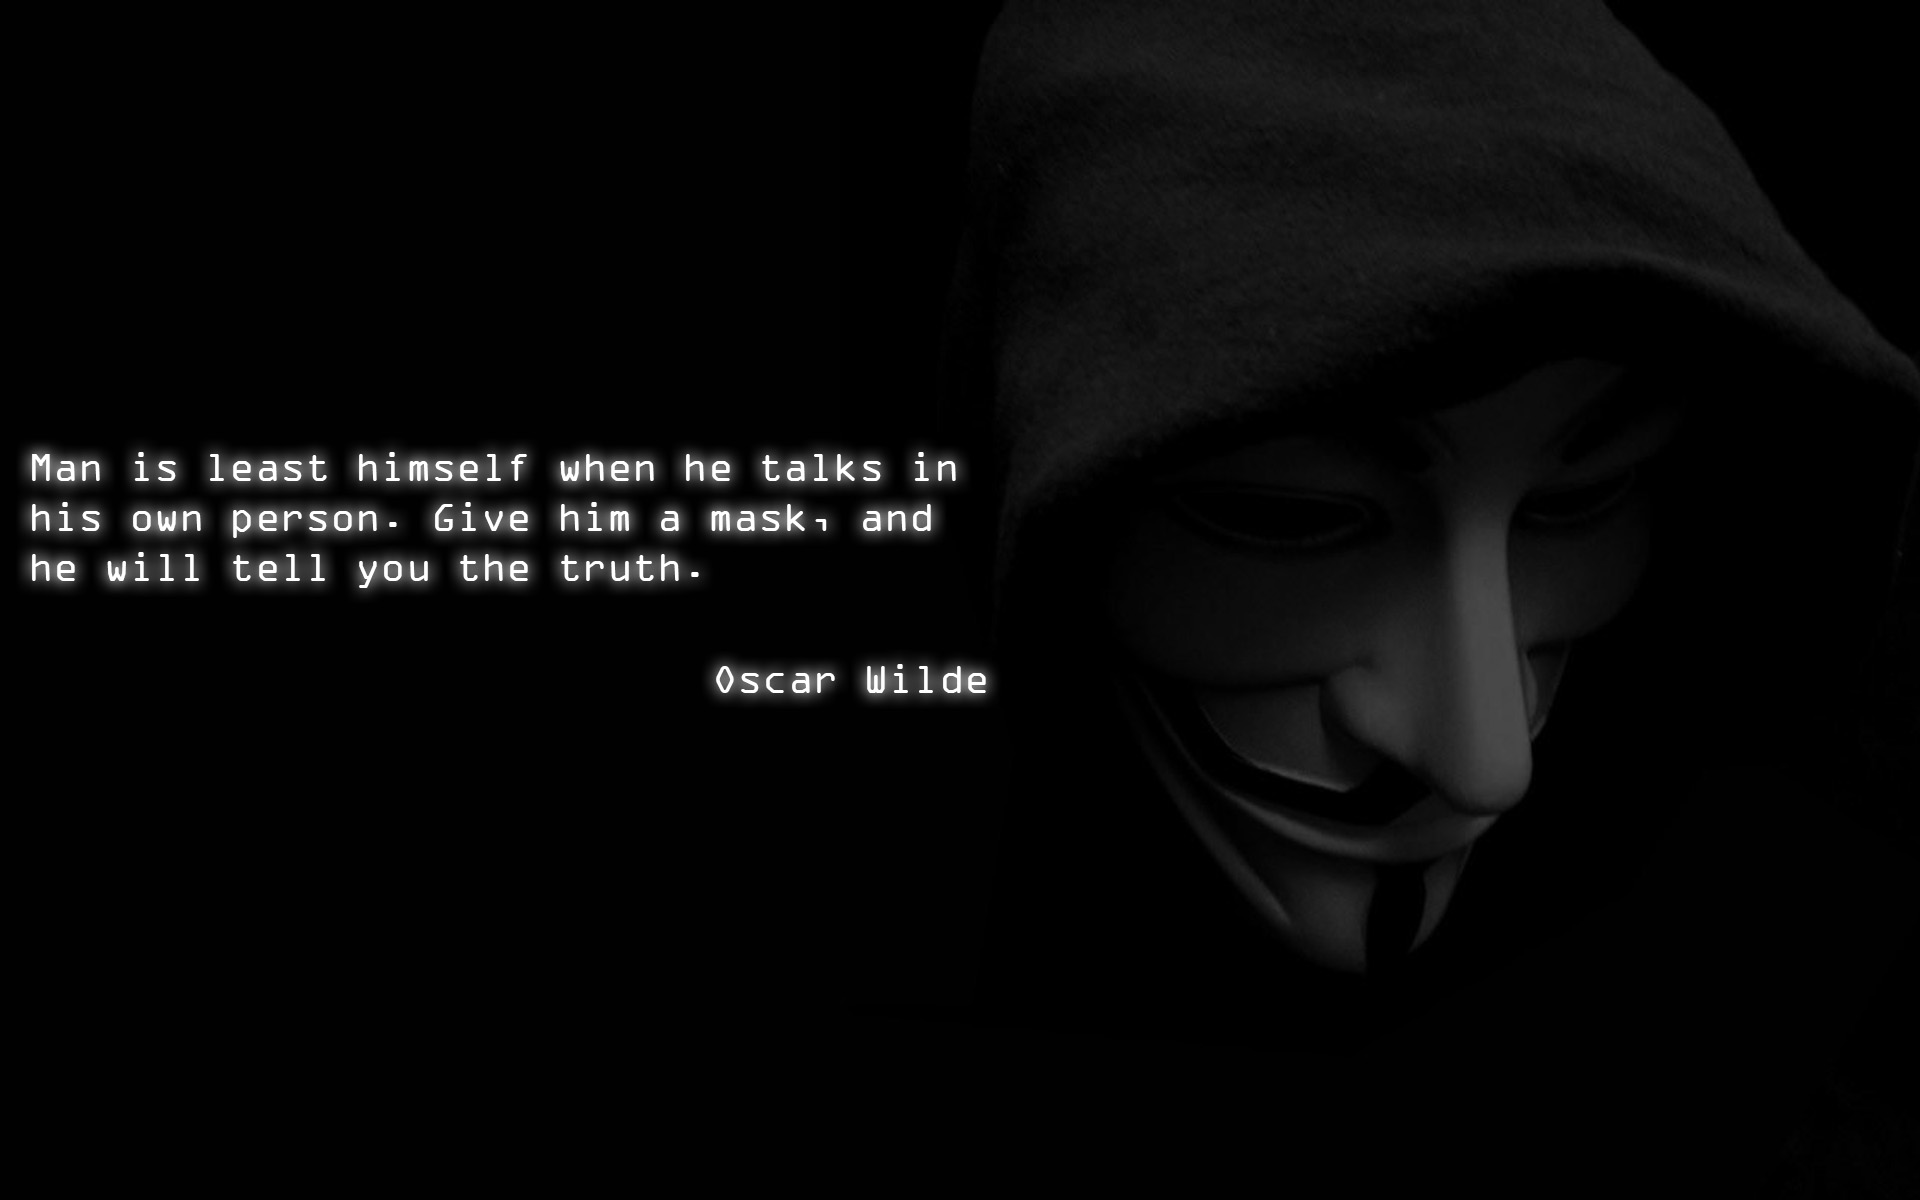 Anonymous Wallpaper Just Added A Quote